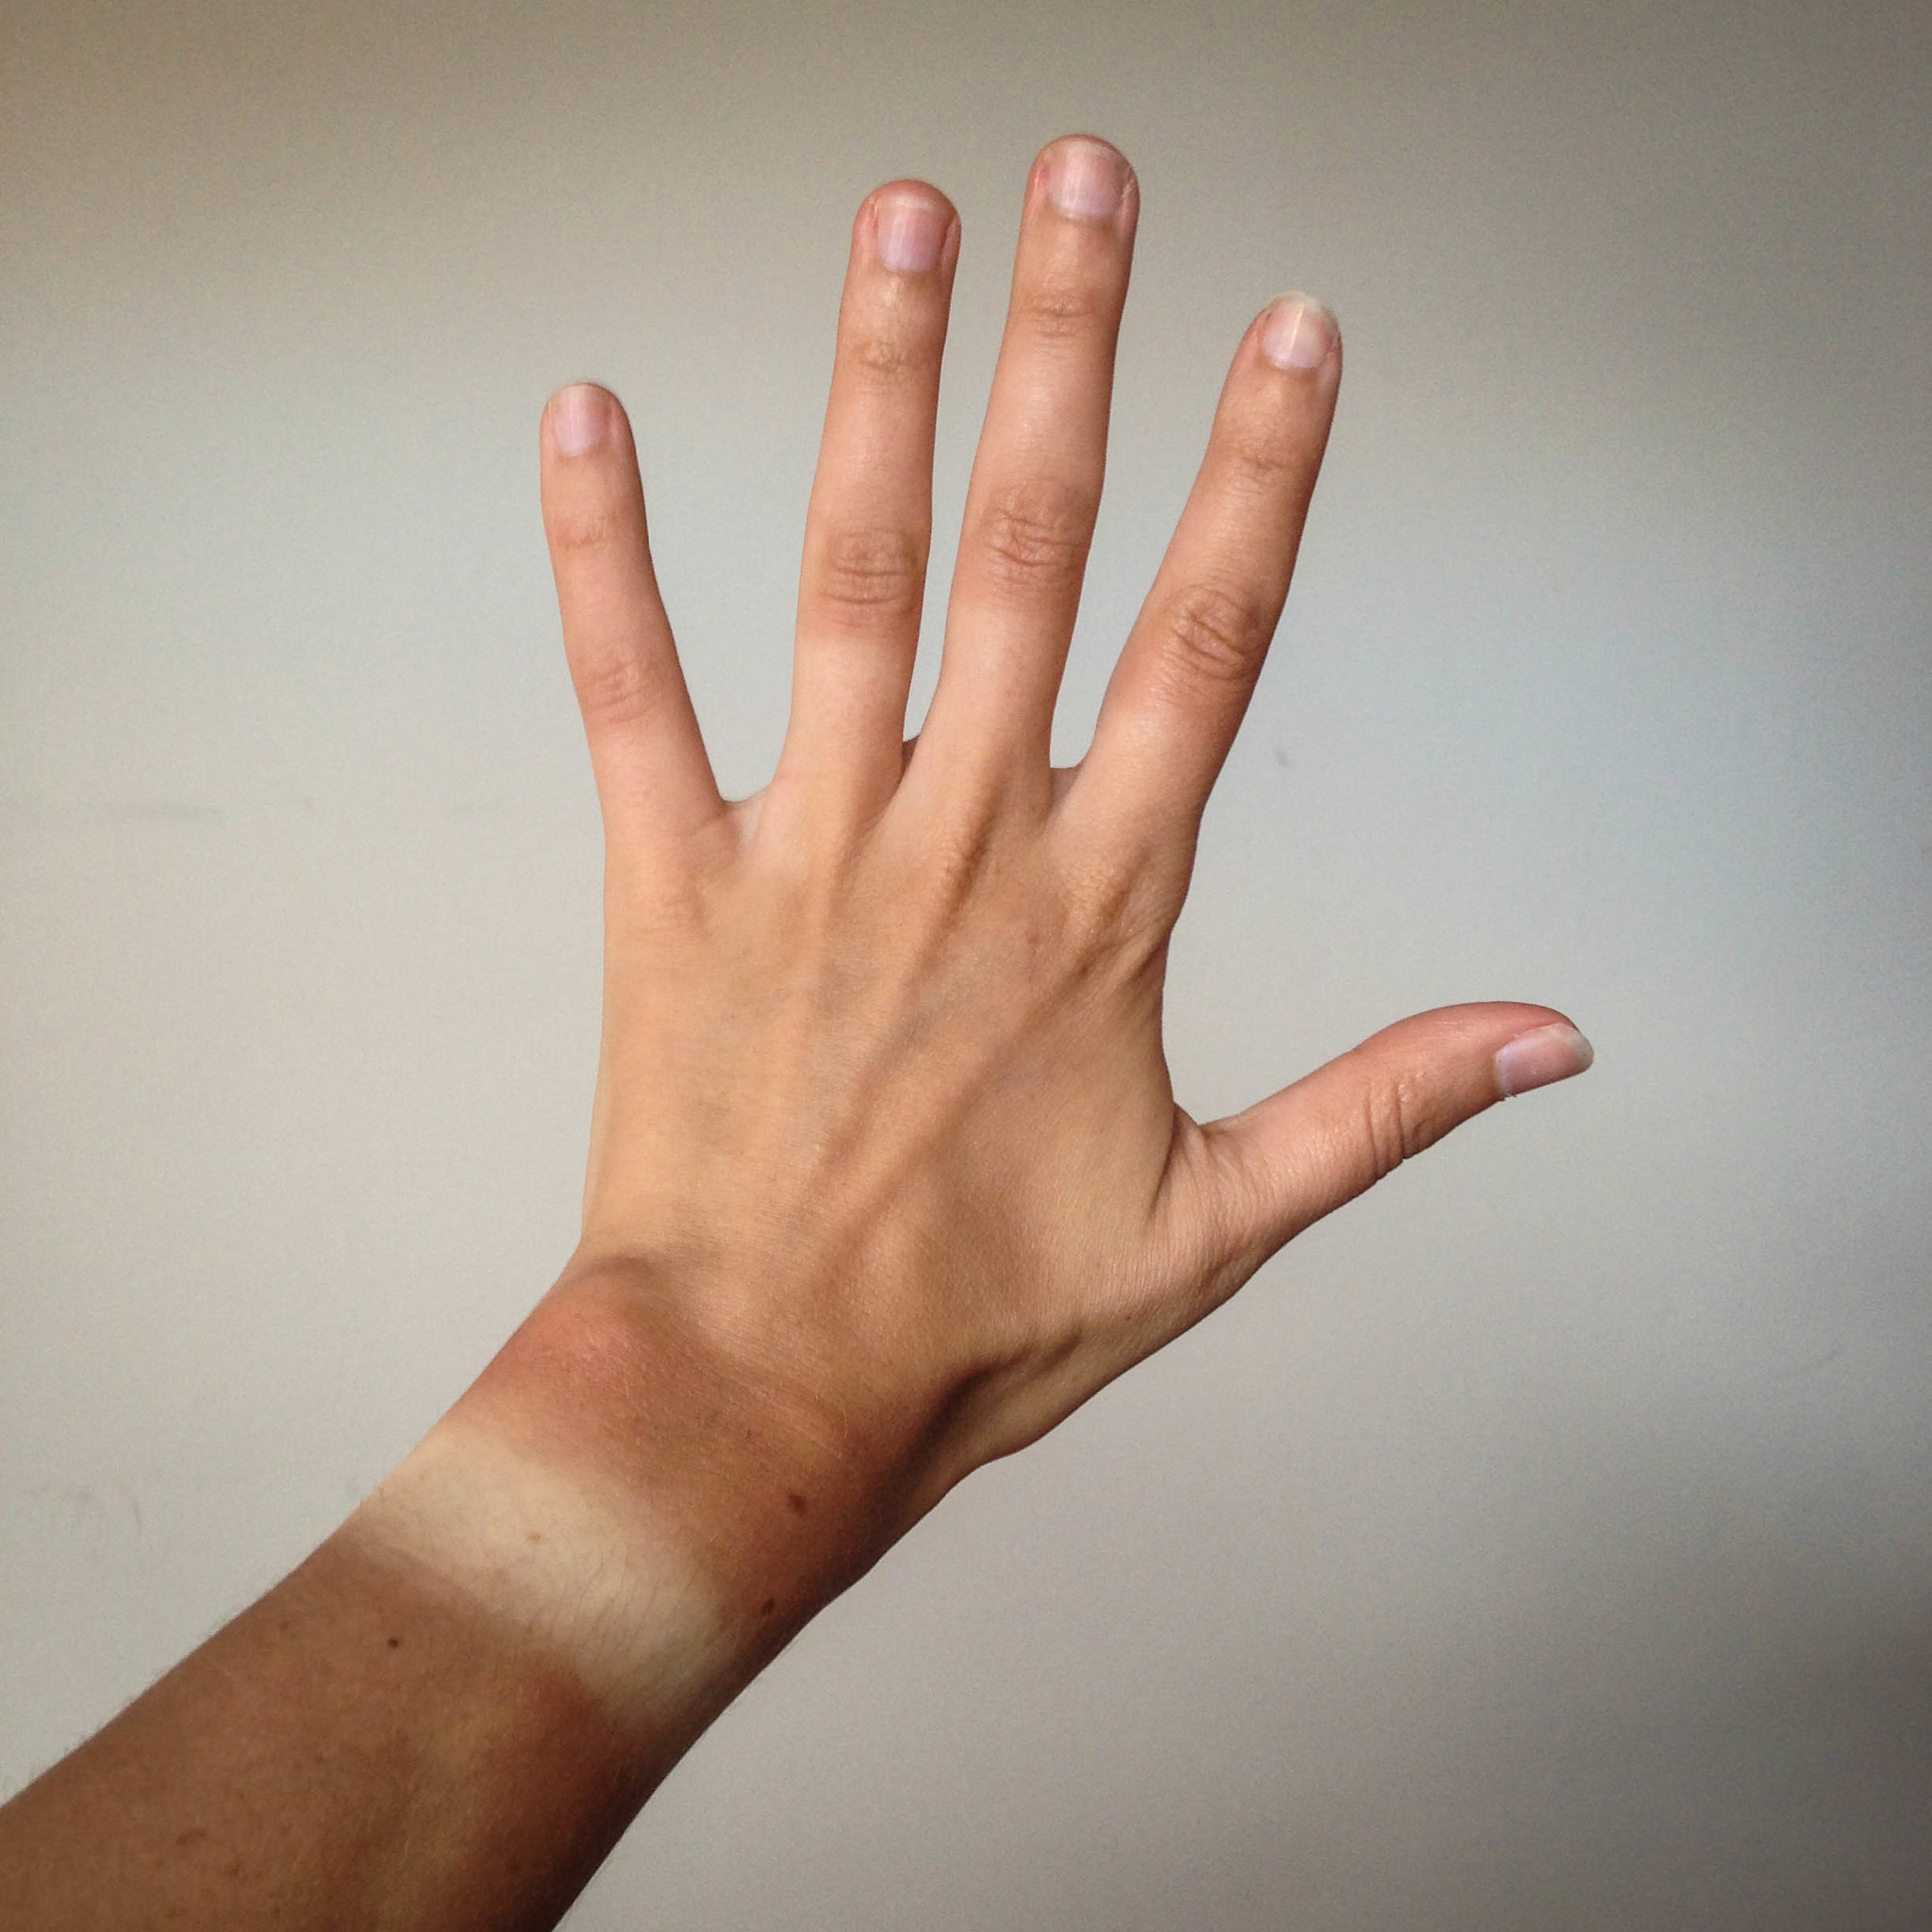 Image shows a hand with a tan line where a watch had been worn.